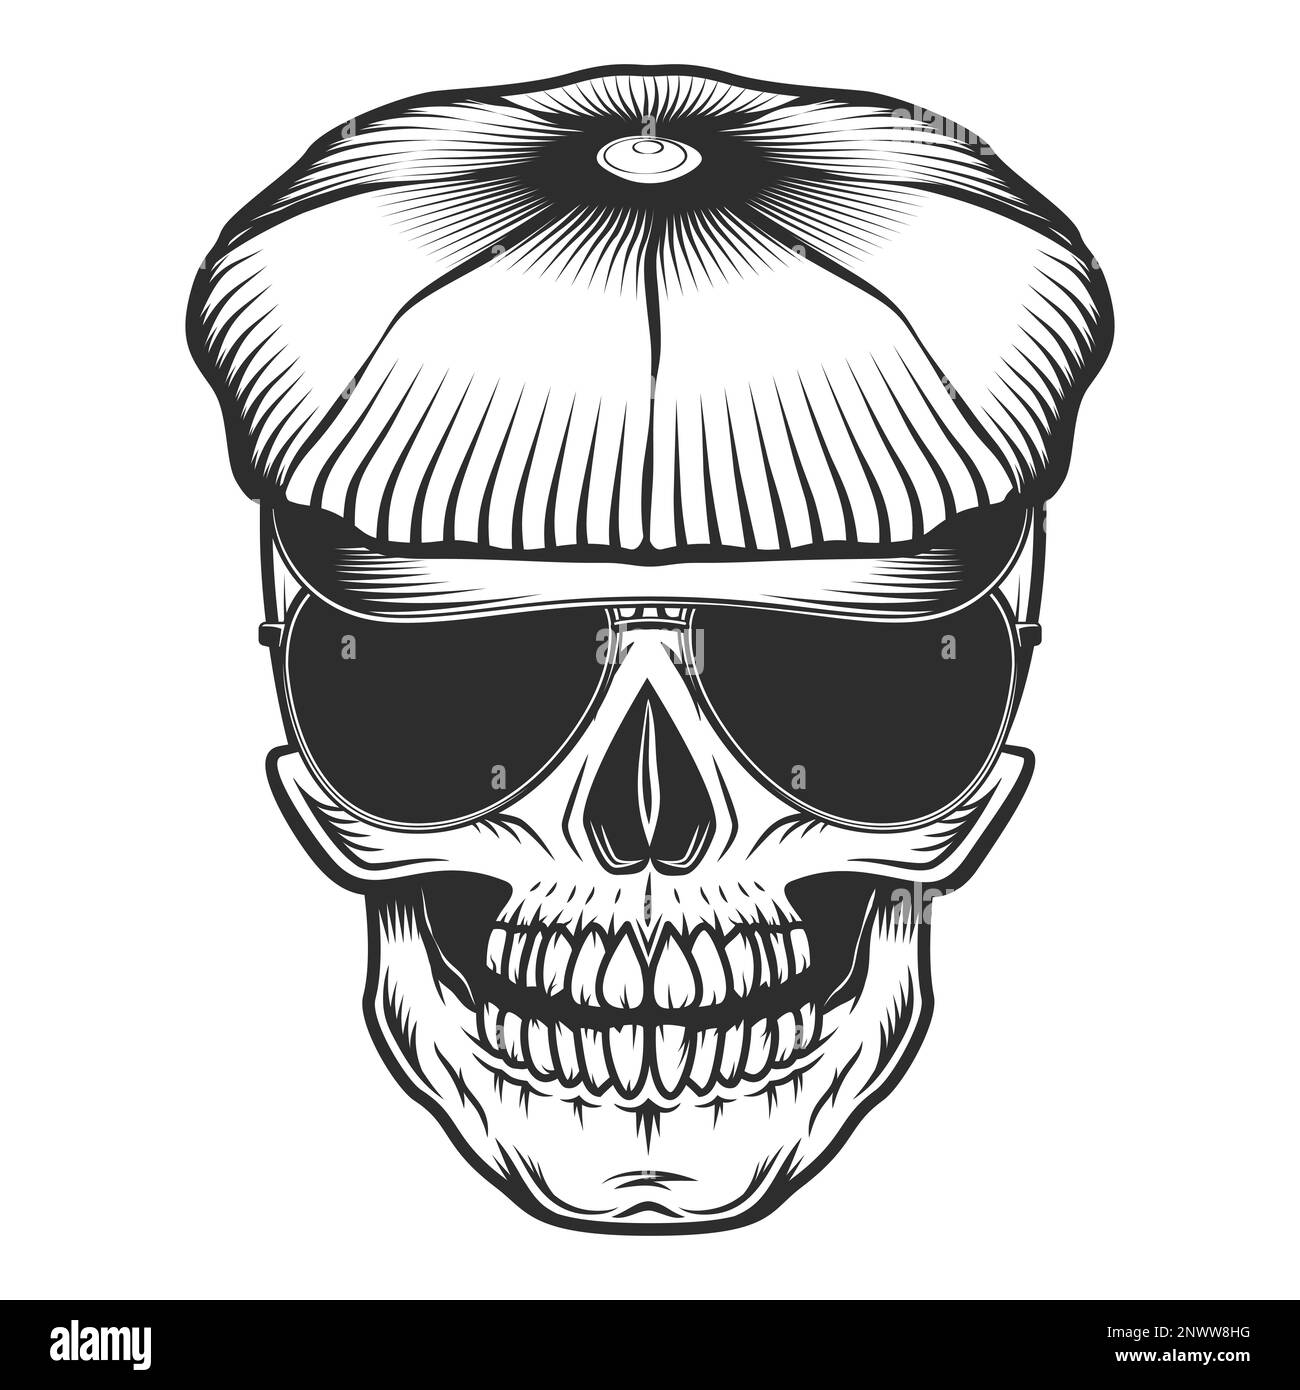 Skull in the tweed hat flat cap with sunglasses vintage vector illustration Stock Vector